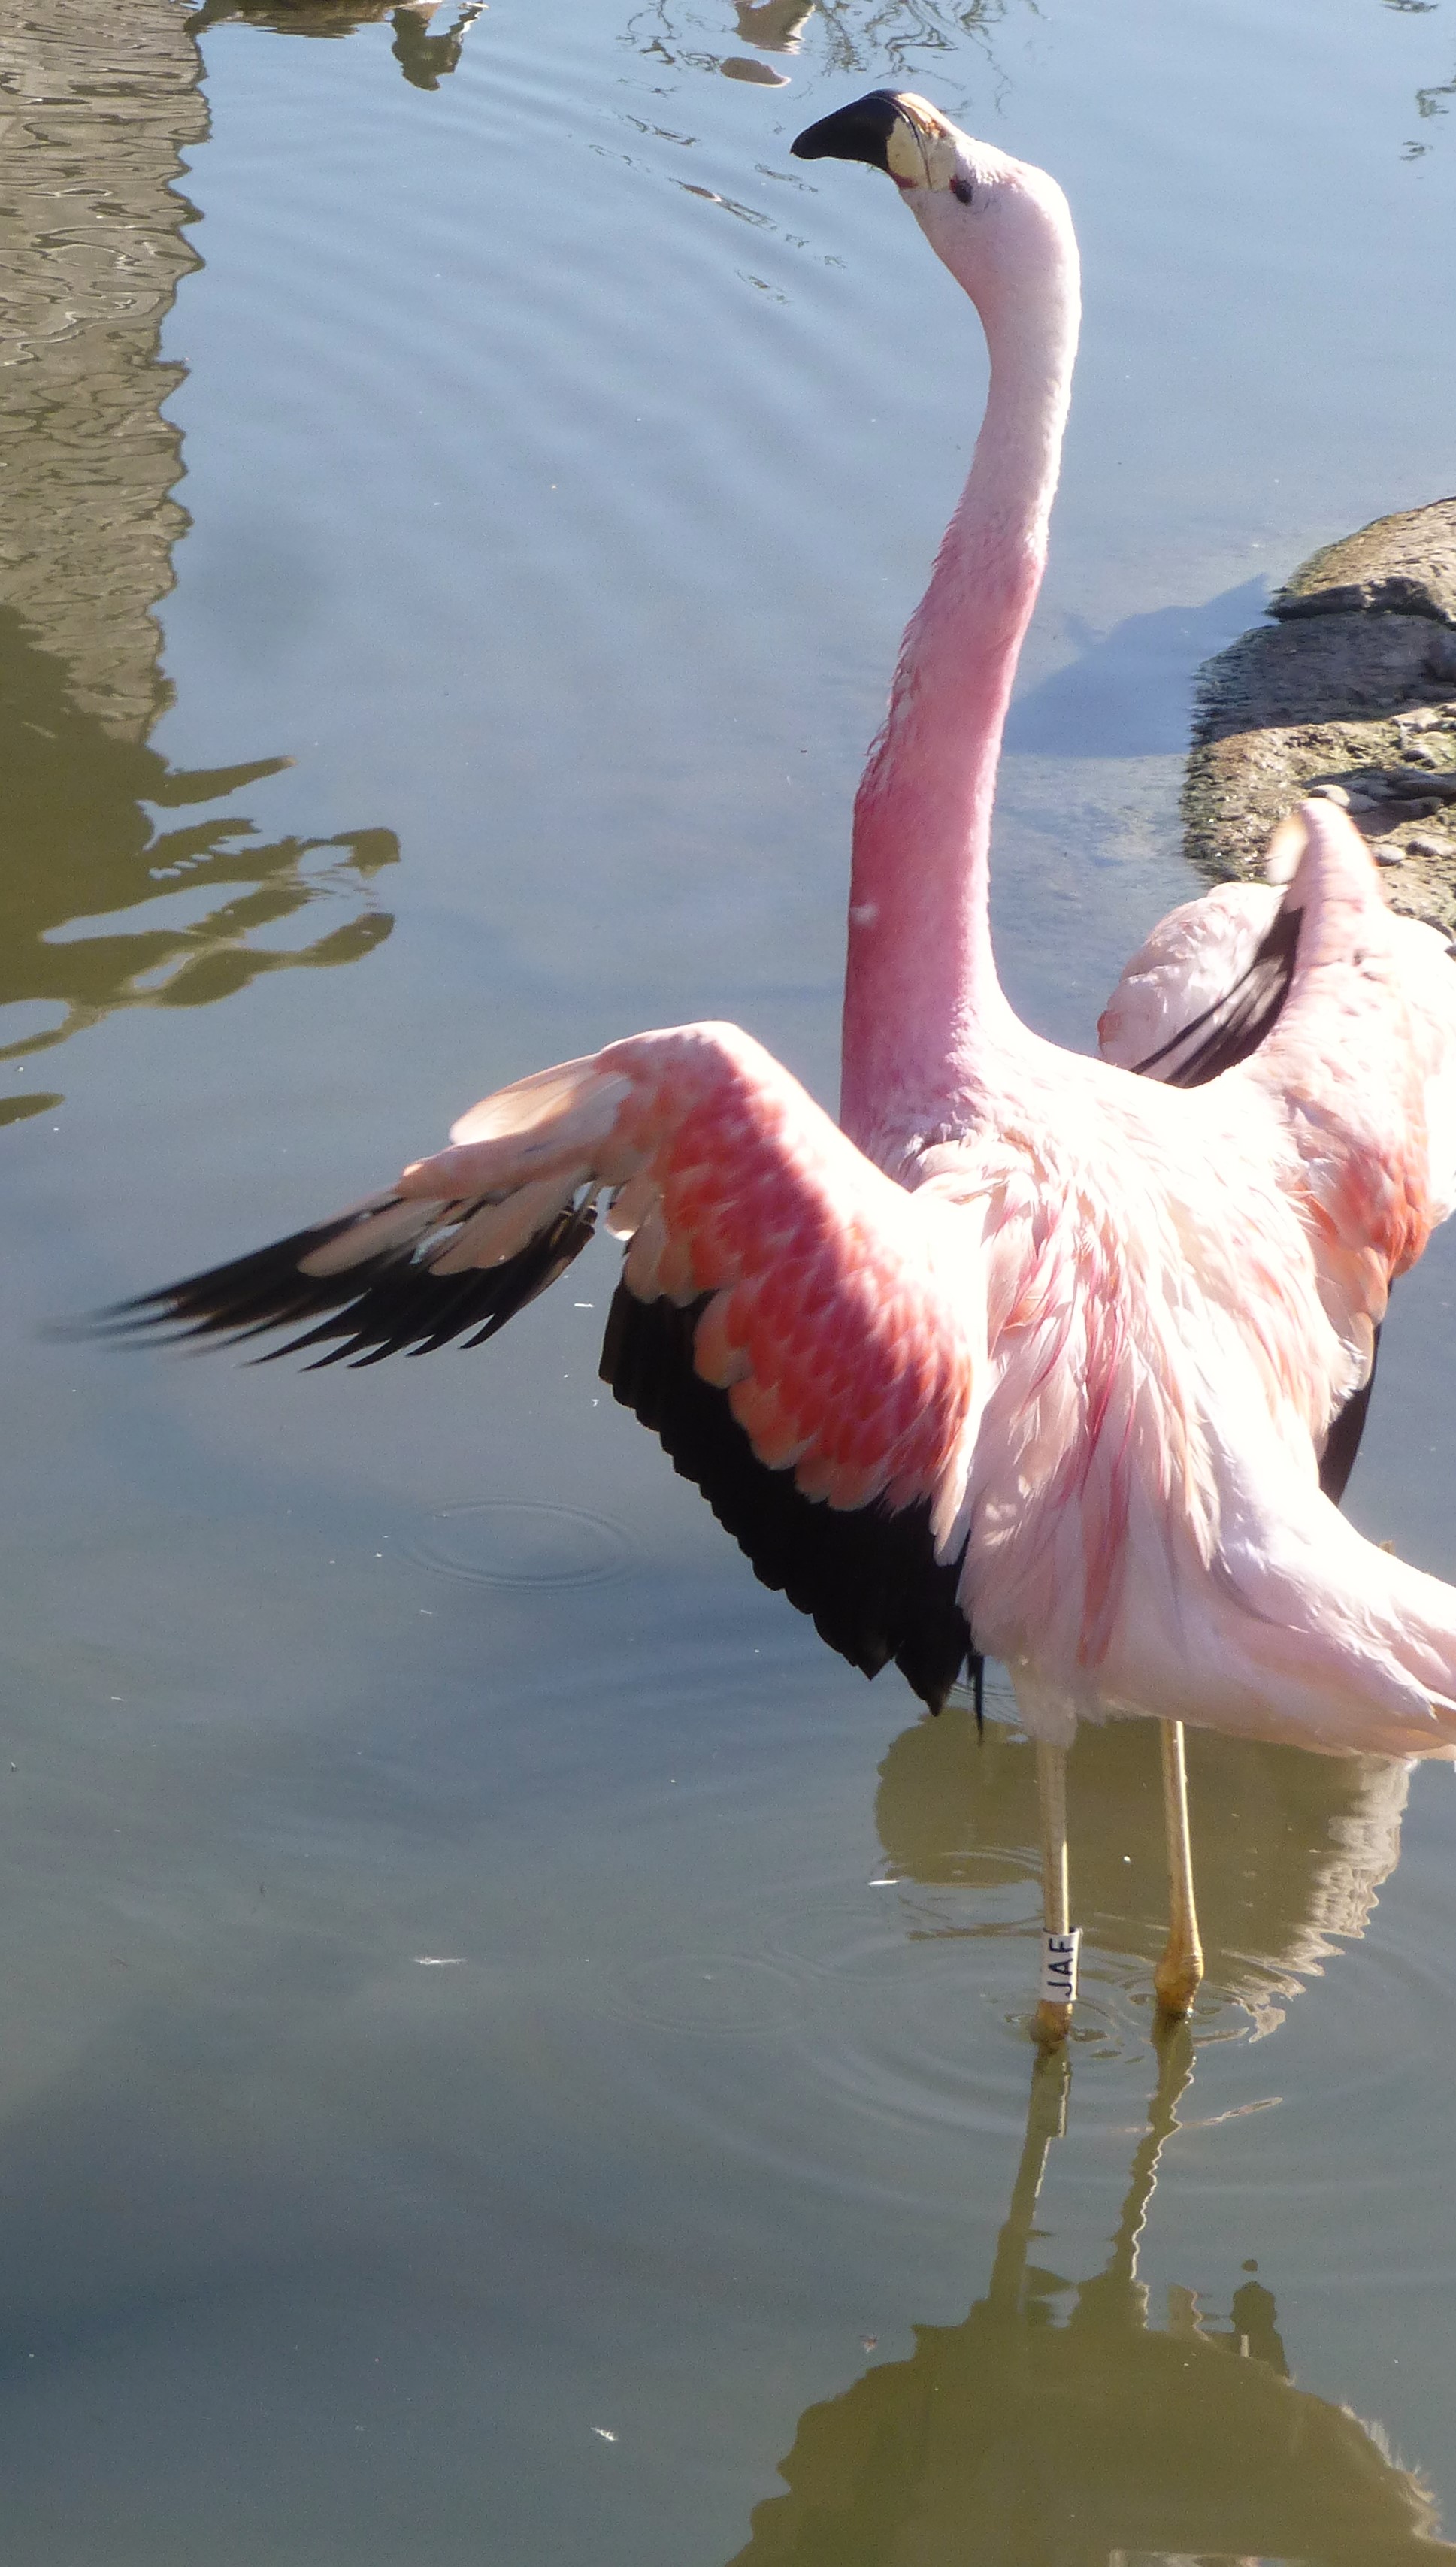 Dropping black feathers is a sign that a flamingo is probably not going to breed this year, this example in an Andean flamingo.